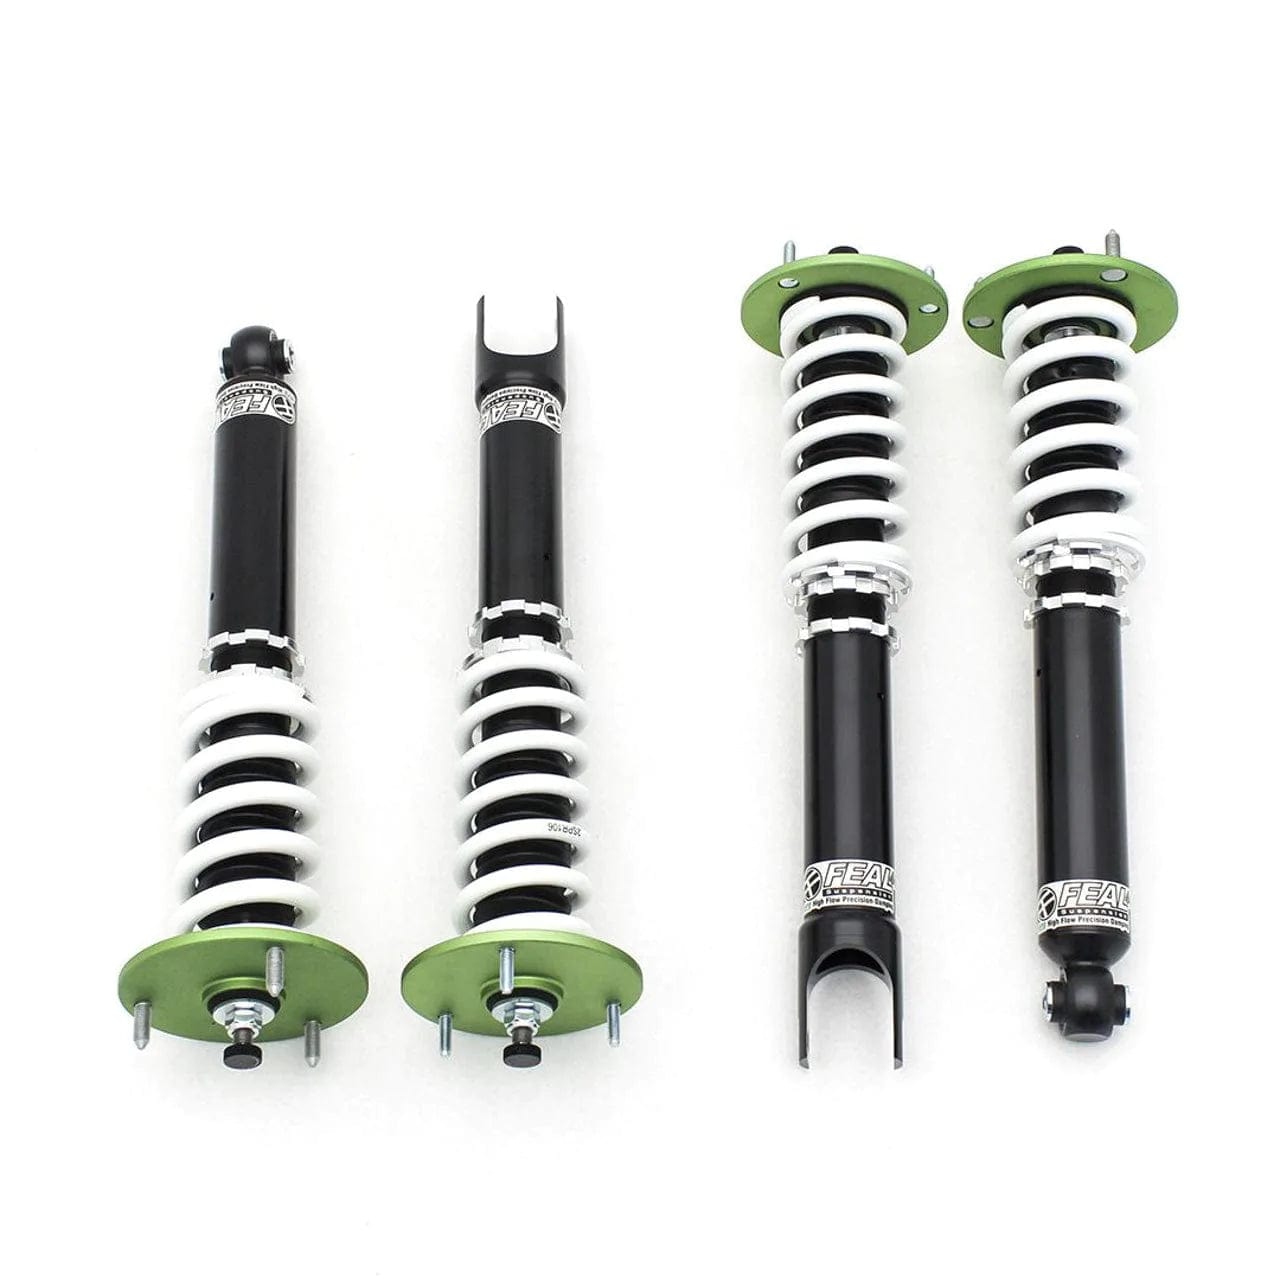 Feal 441 Pro Long Stroke Heavy Front Coilovers - 1989-1994 Nissan 240SX (S13) 441NI-01LH